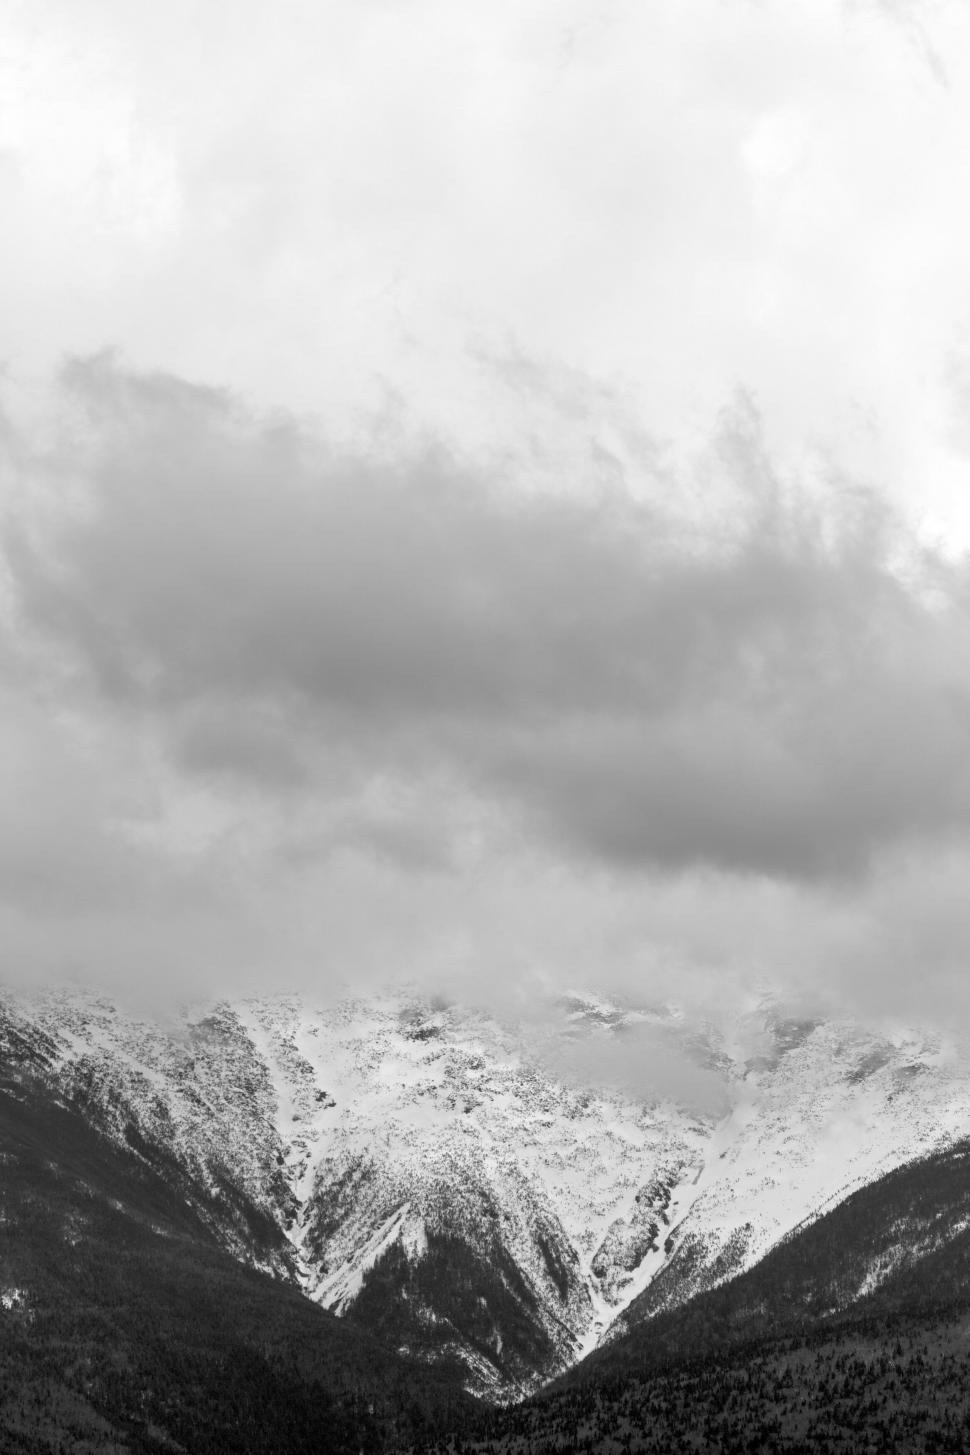 Free Image of Snow-capped mountain range under clouds 